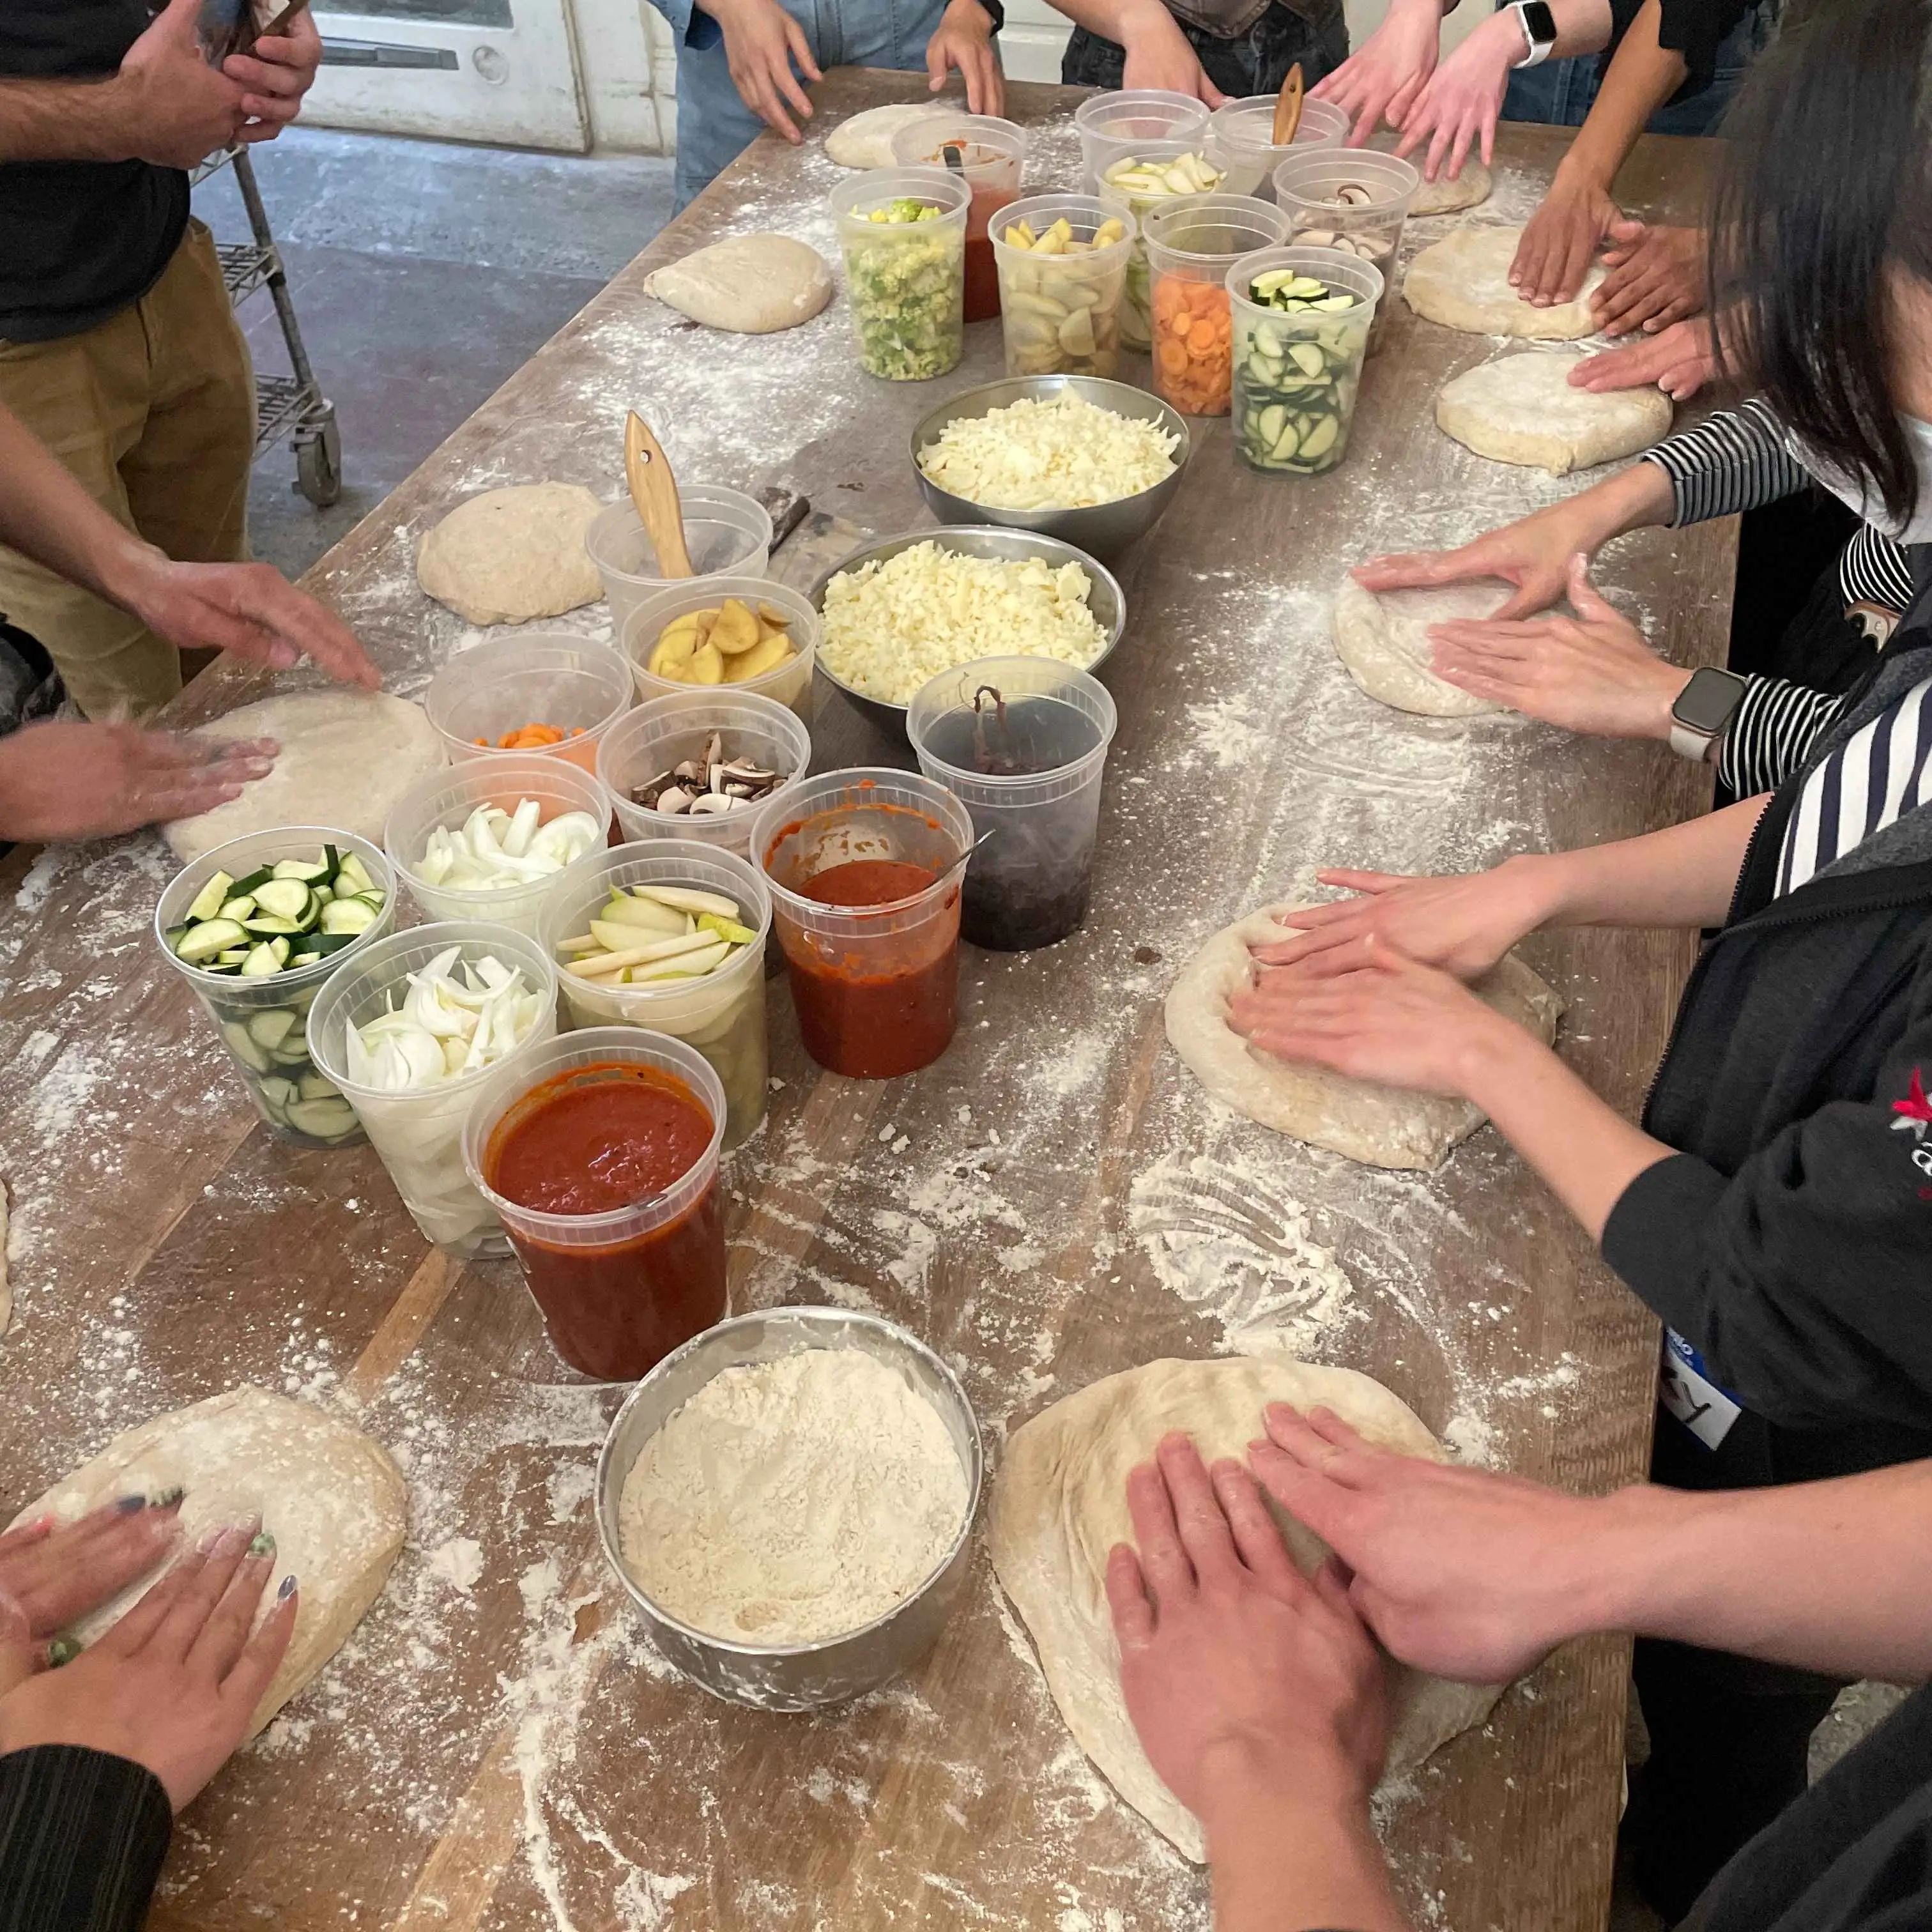 Josey Pizza Making Class - May 18 Delivery